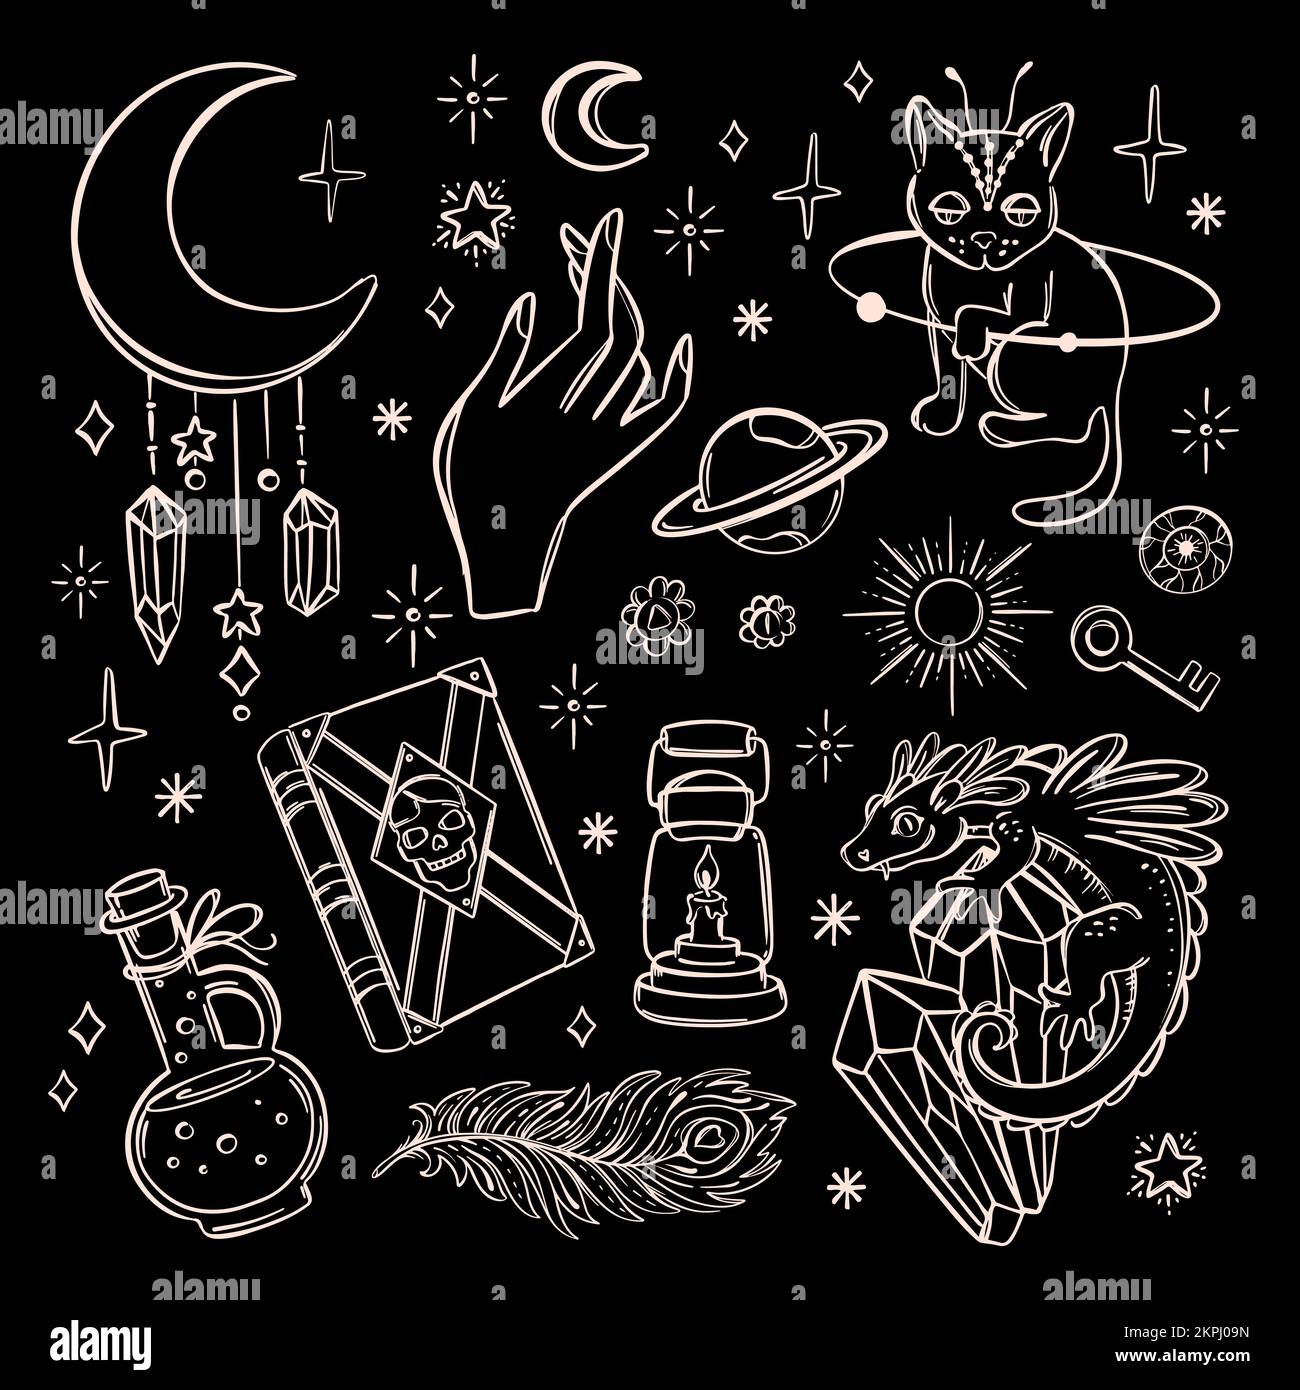 WITCH SYMBOLS Astrological Mystic Character Variations Fire Salamander Space Cat Occult Esoteric Witchcraft Hand Drawn Sketch Alchemist Objects Design Stock Vector